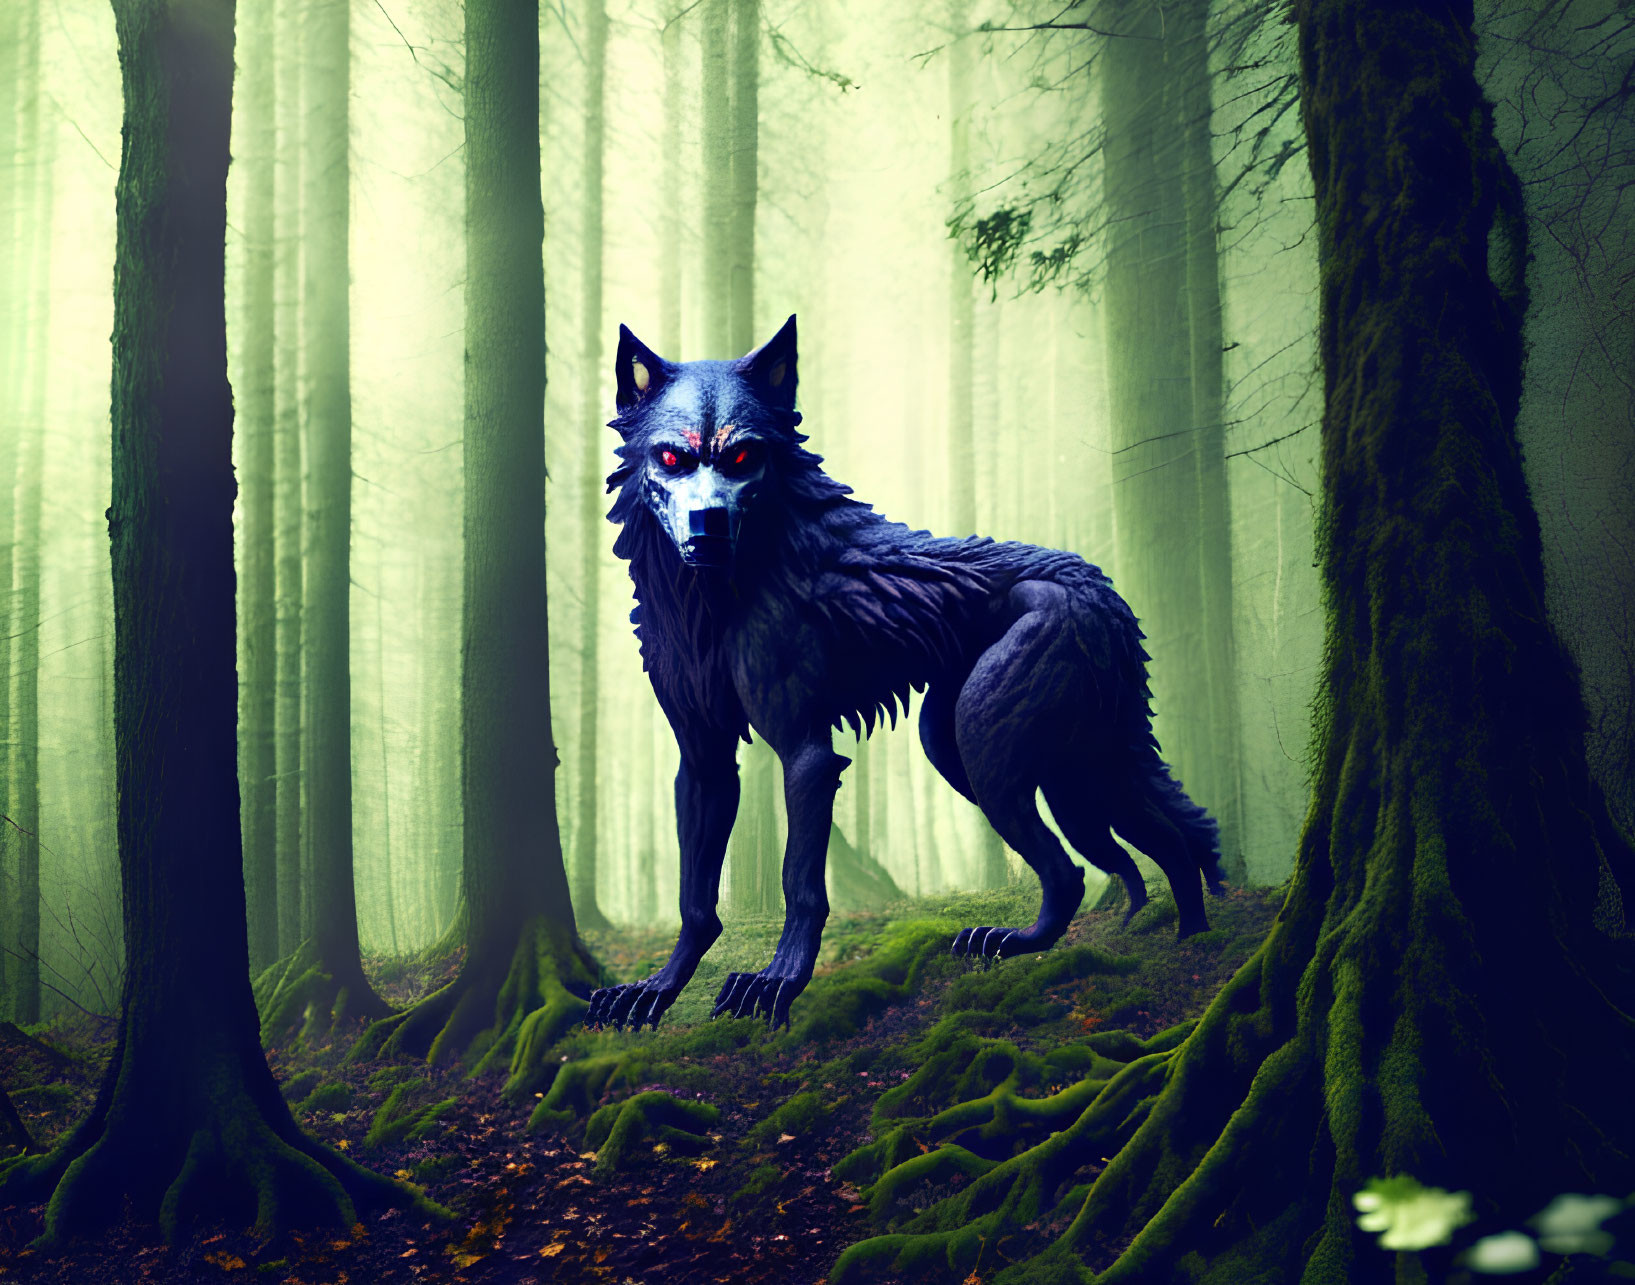 Mystical black wolf with blue eyes in foggy forest with moss-covered trees